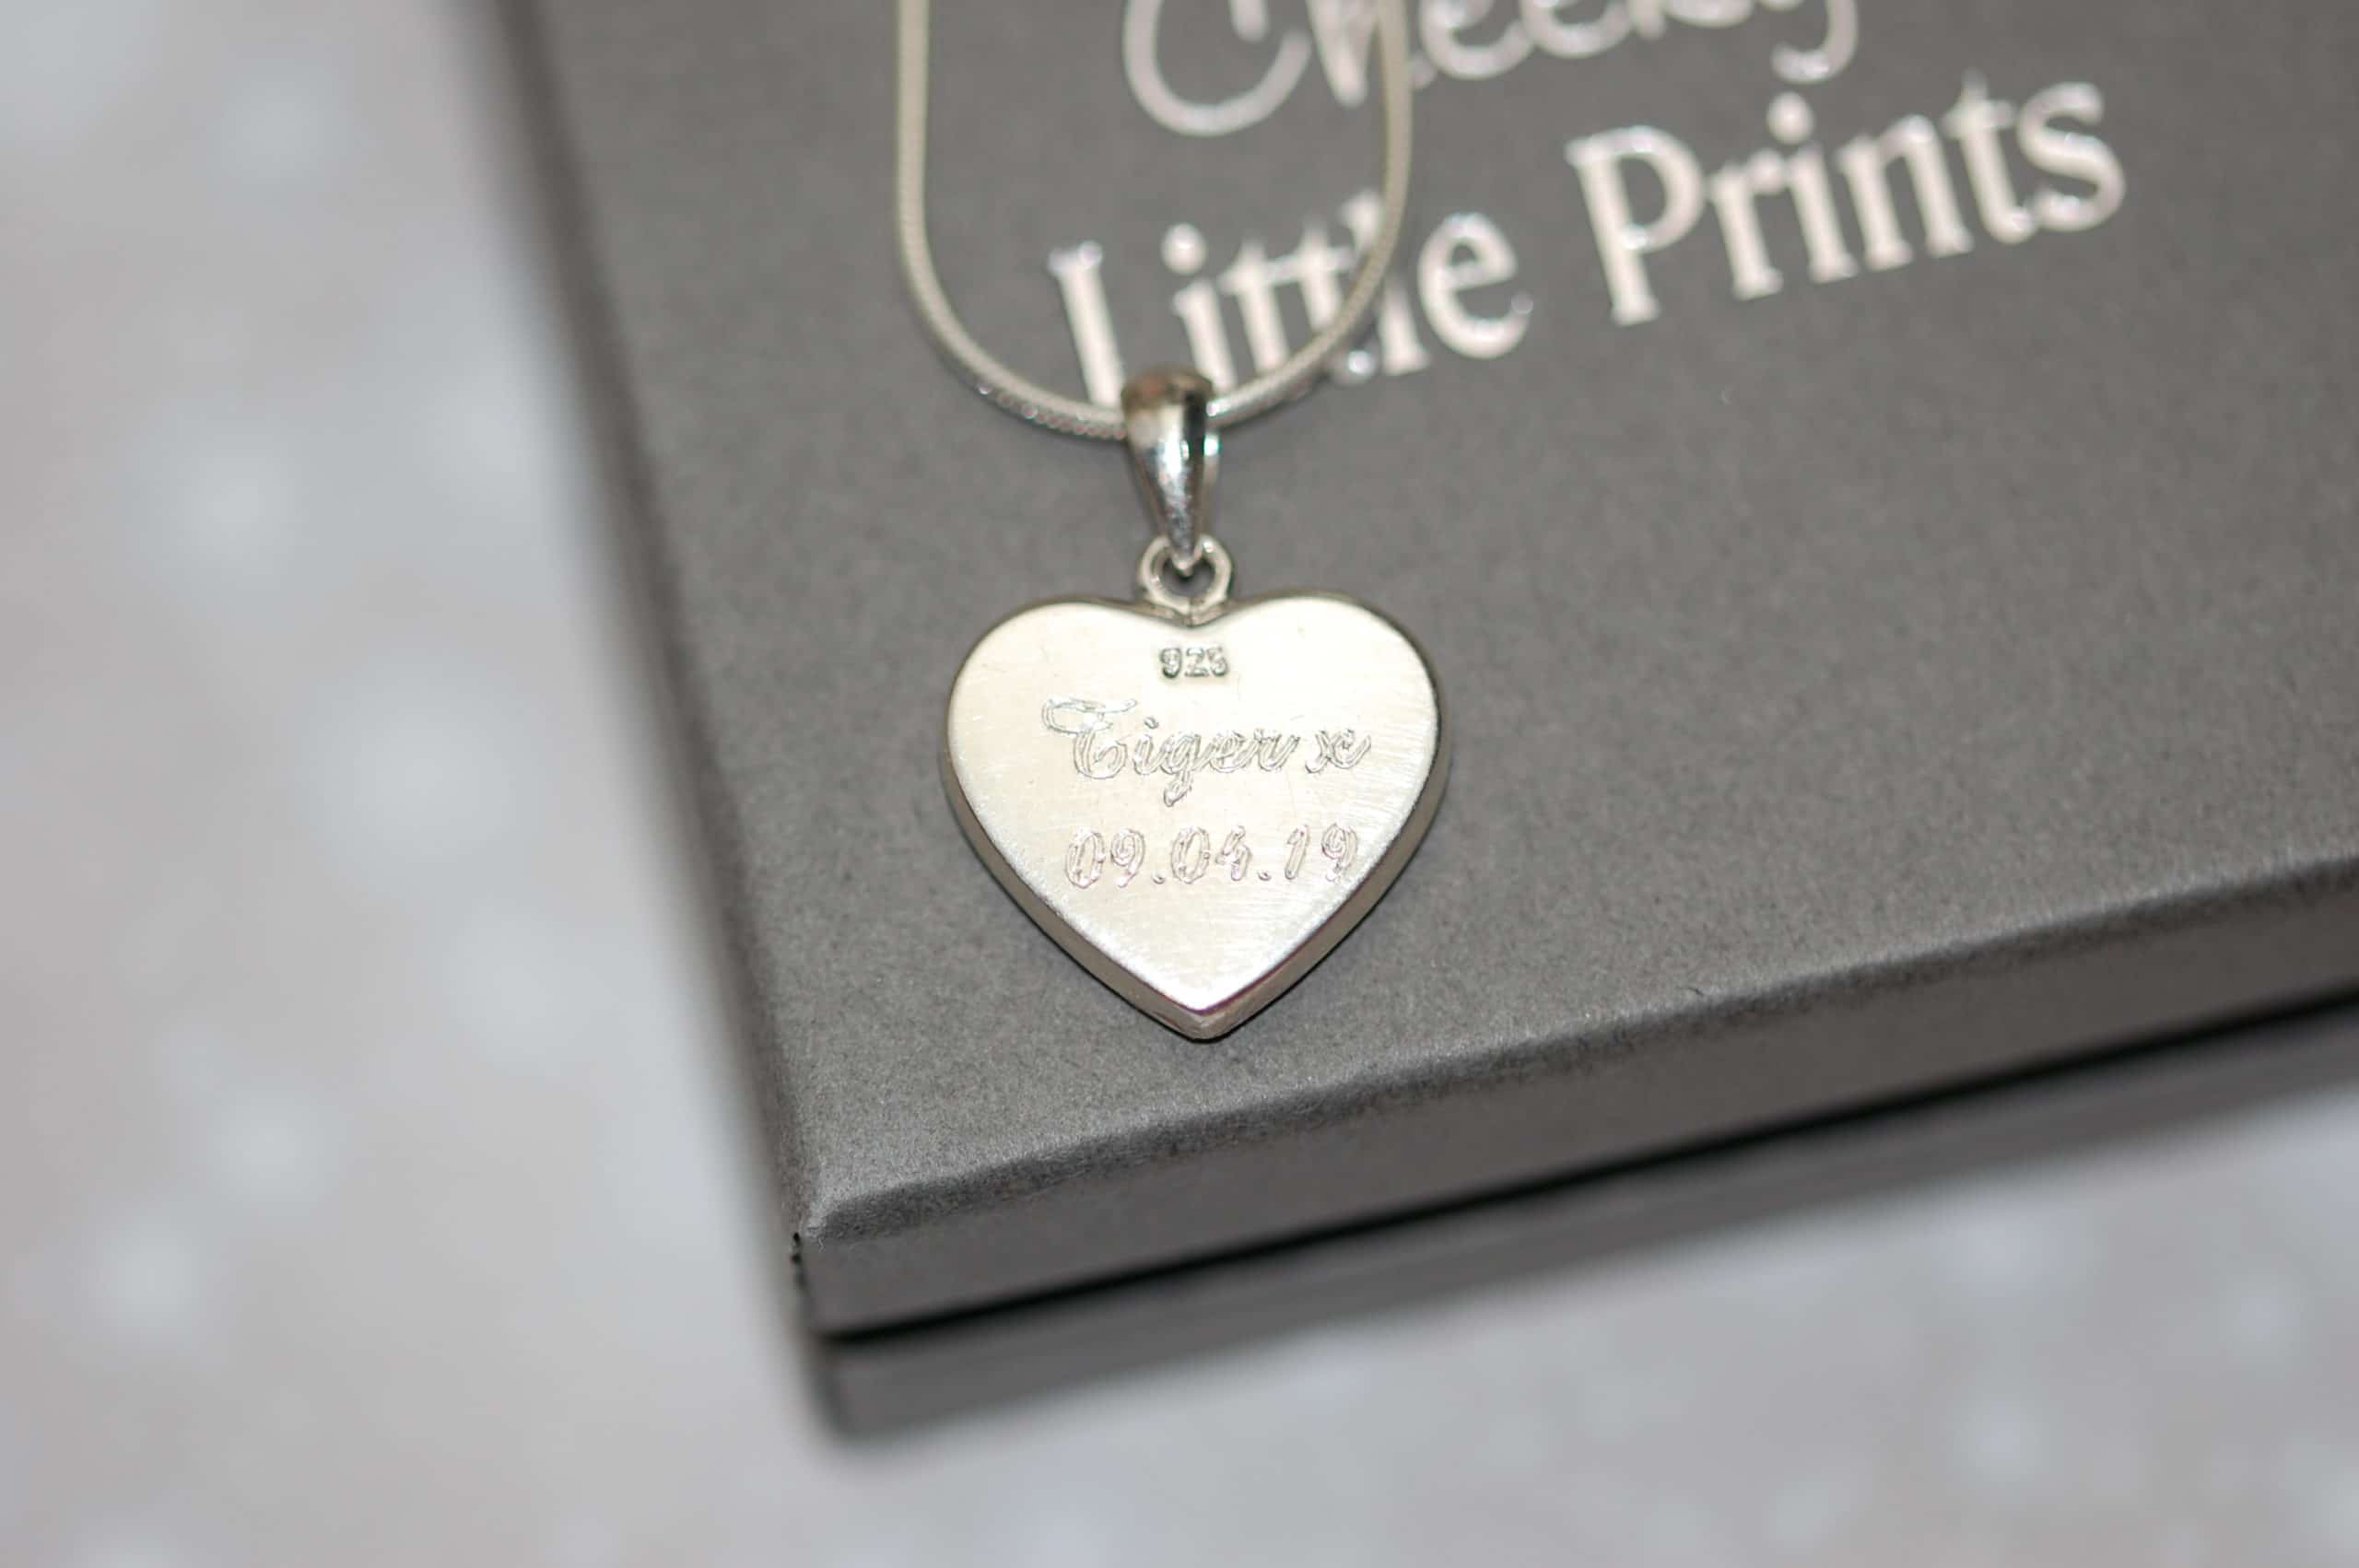 Pet name and date engraved on the back of silver heart pendant with pet fur or cremation ashes